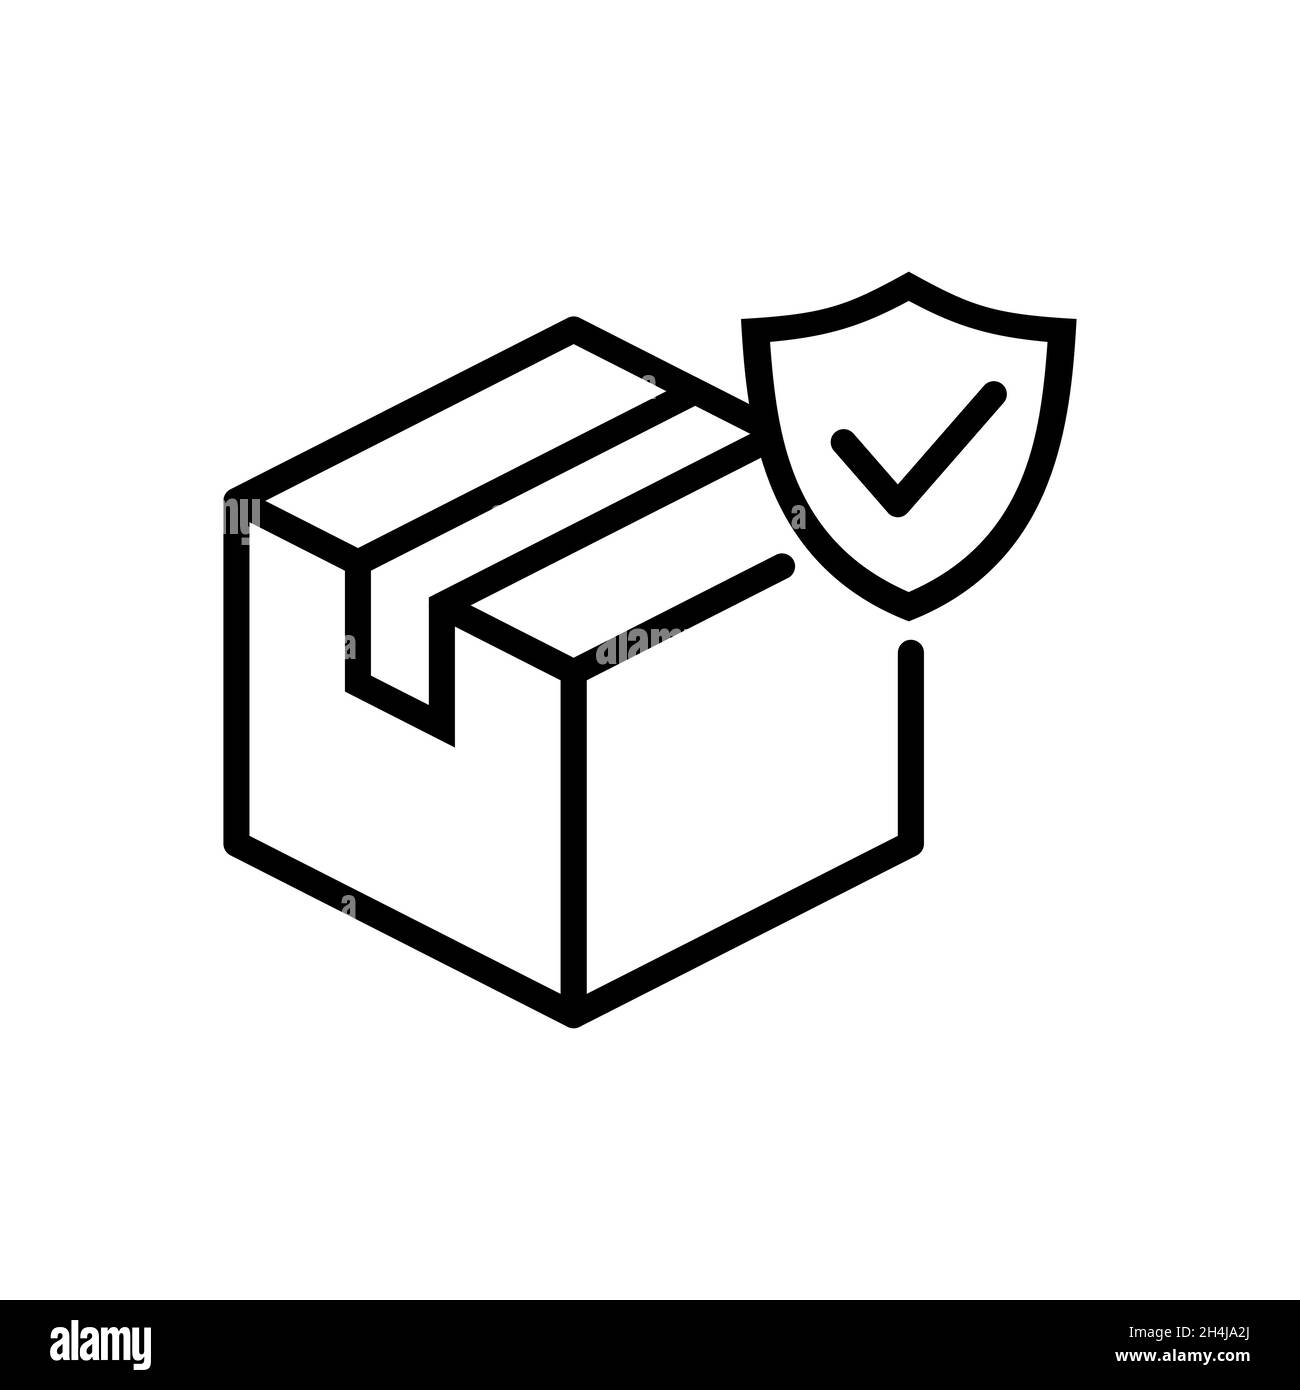 Secure delivery icon. Package box with shield symbol. Check mark tick inside shield. Track order, safe shipping symbol. Product delivery guarantee Stock Vector